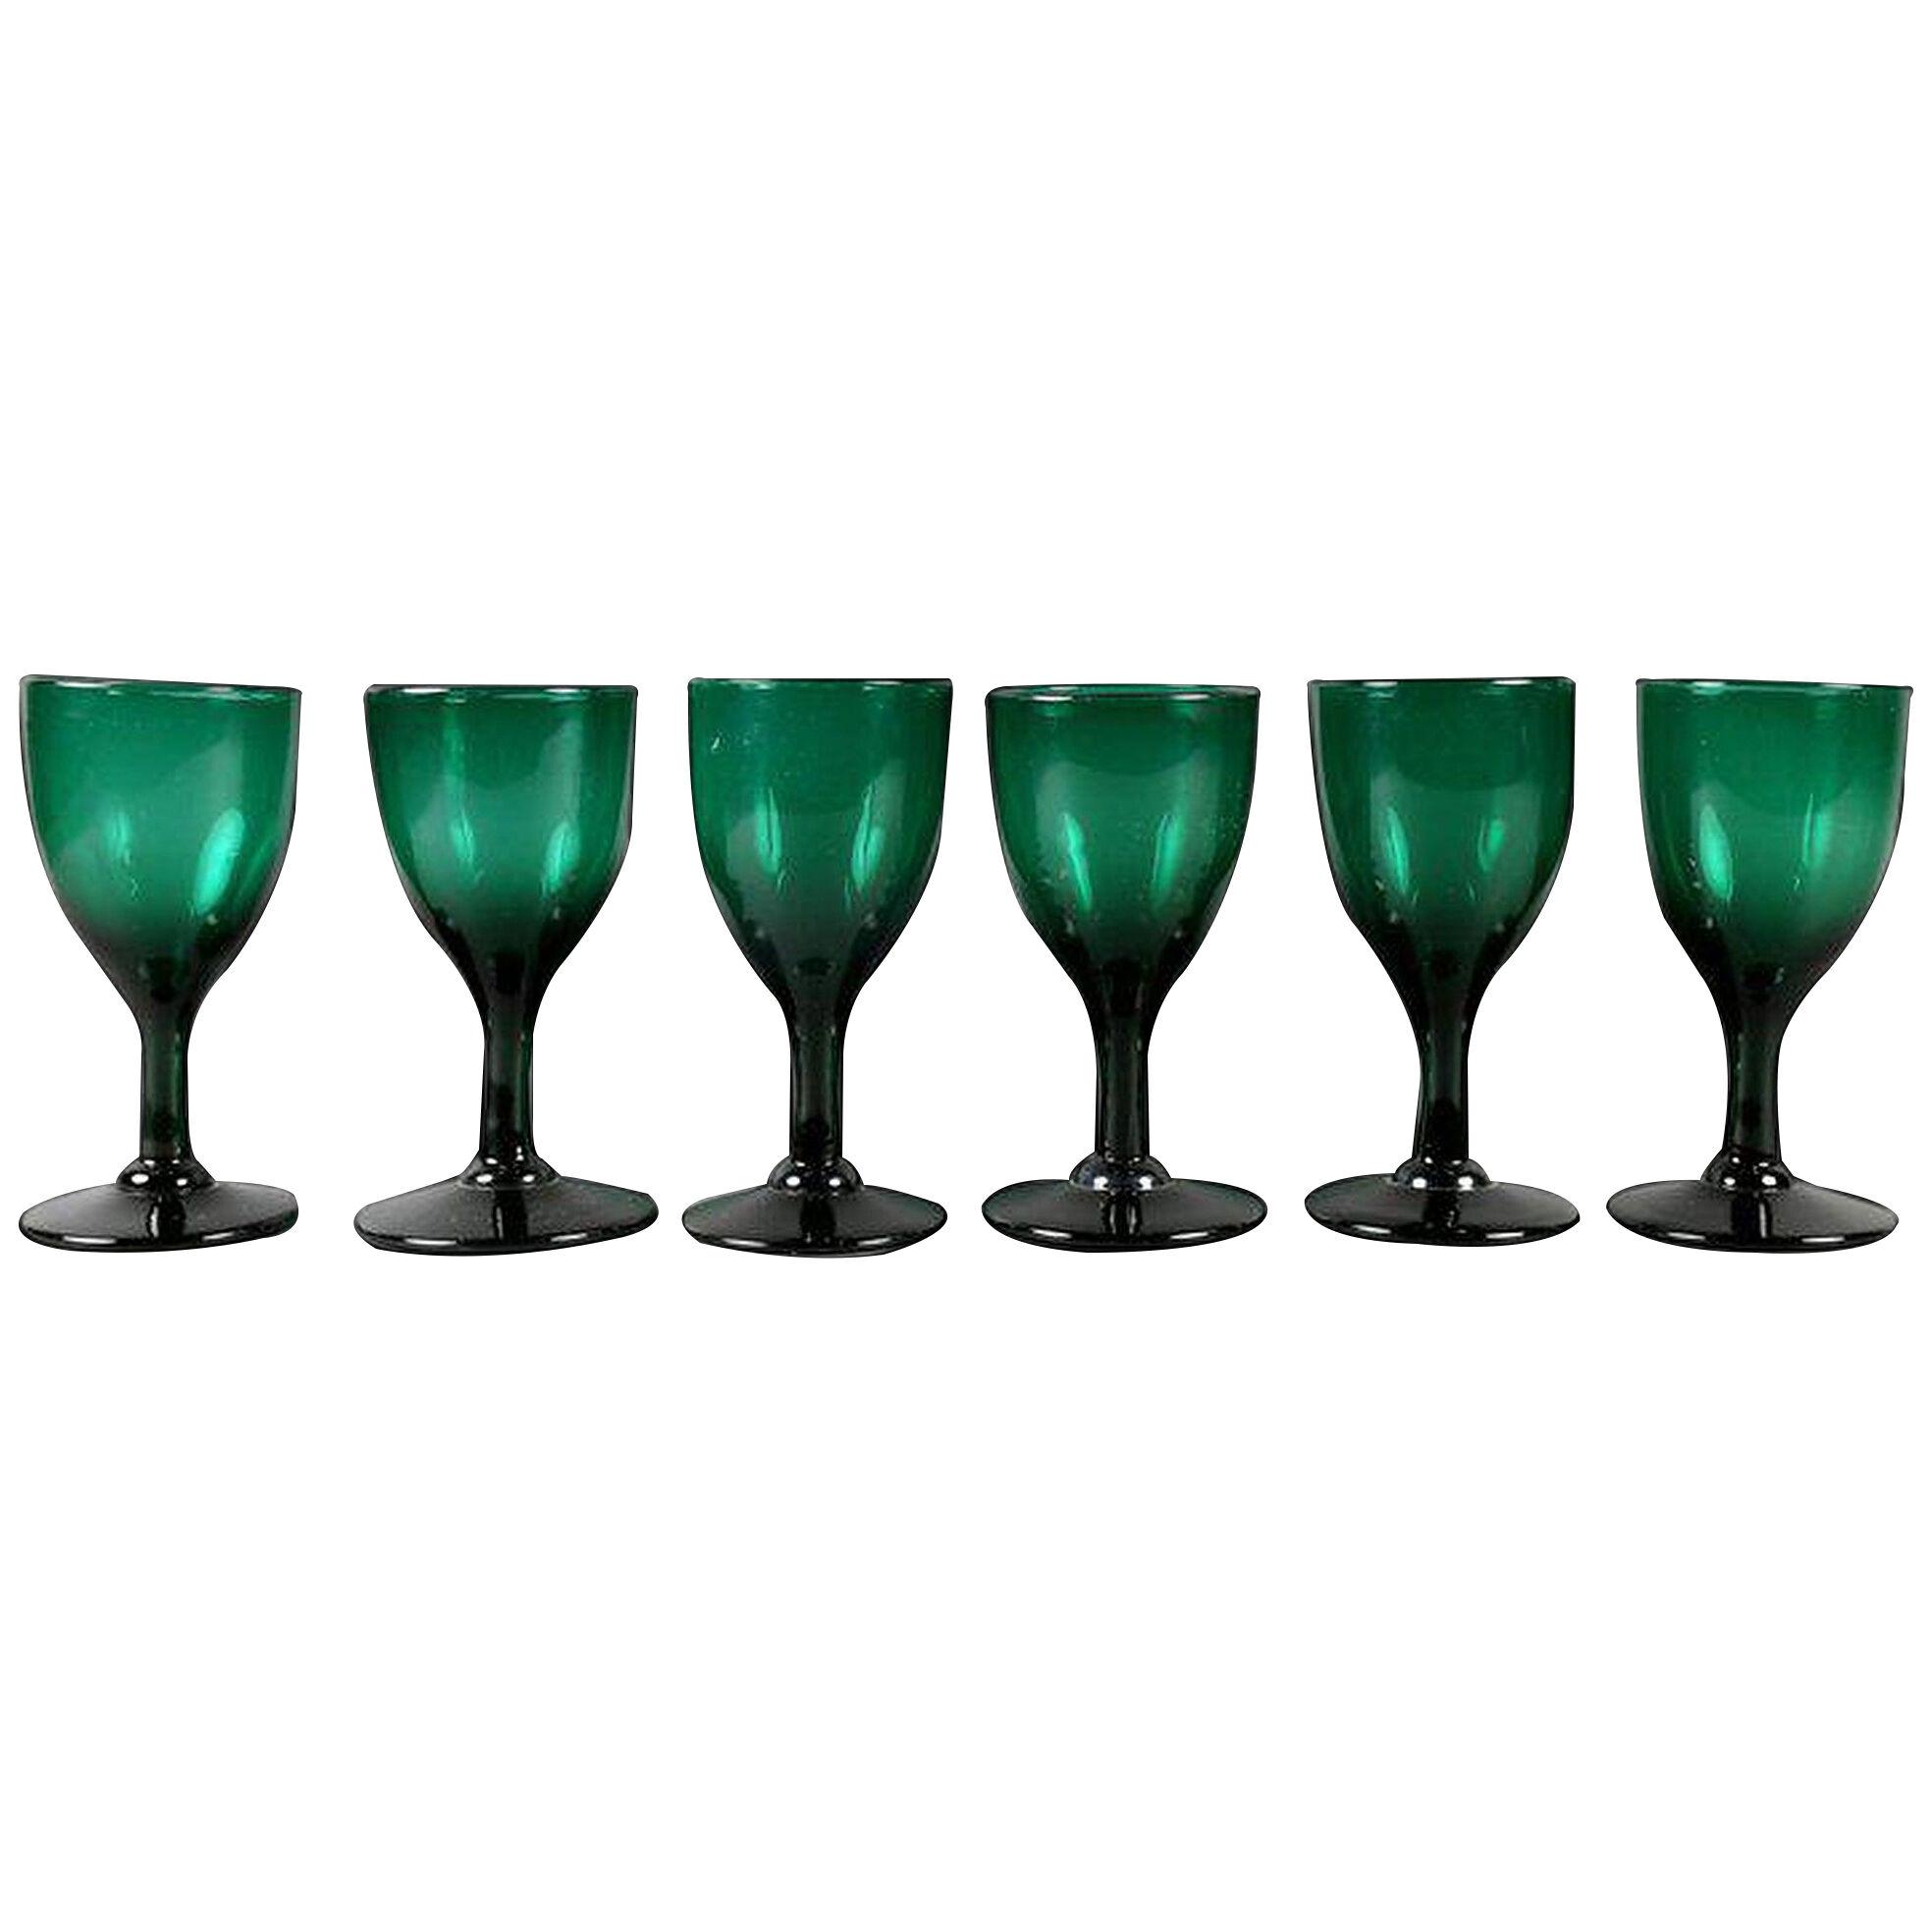 Antique Green Glasses - Collection of 61